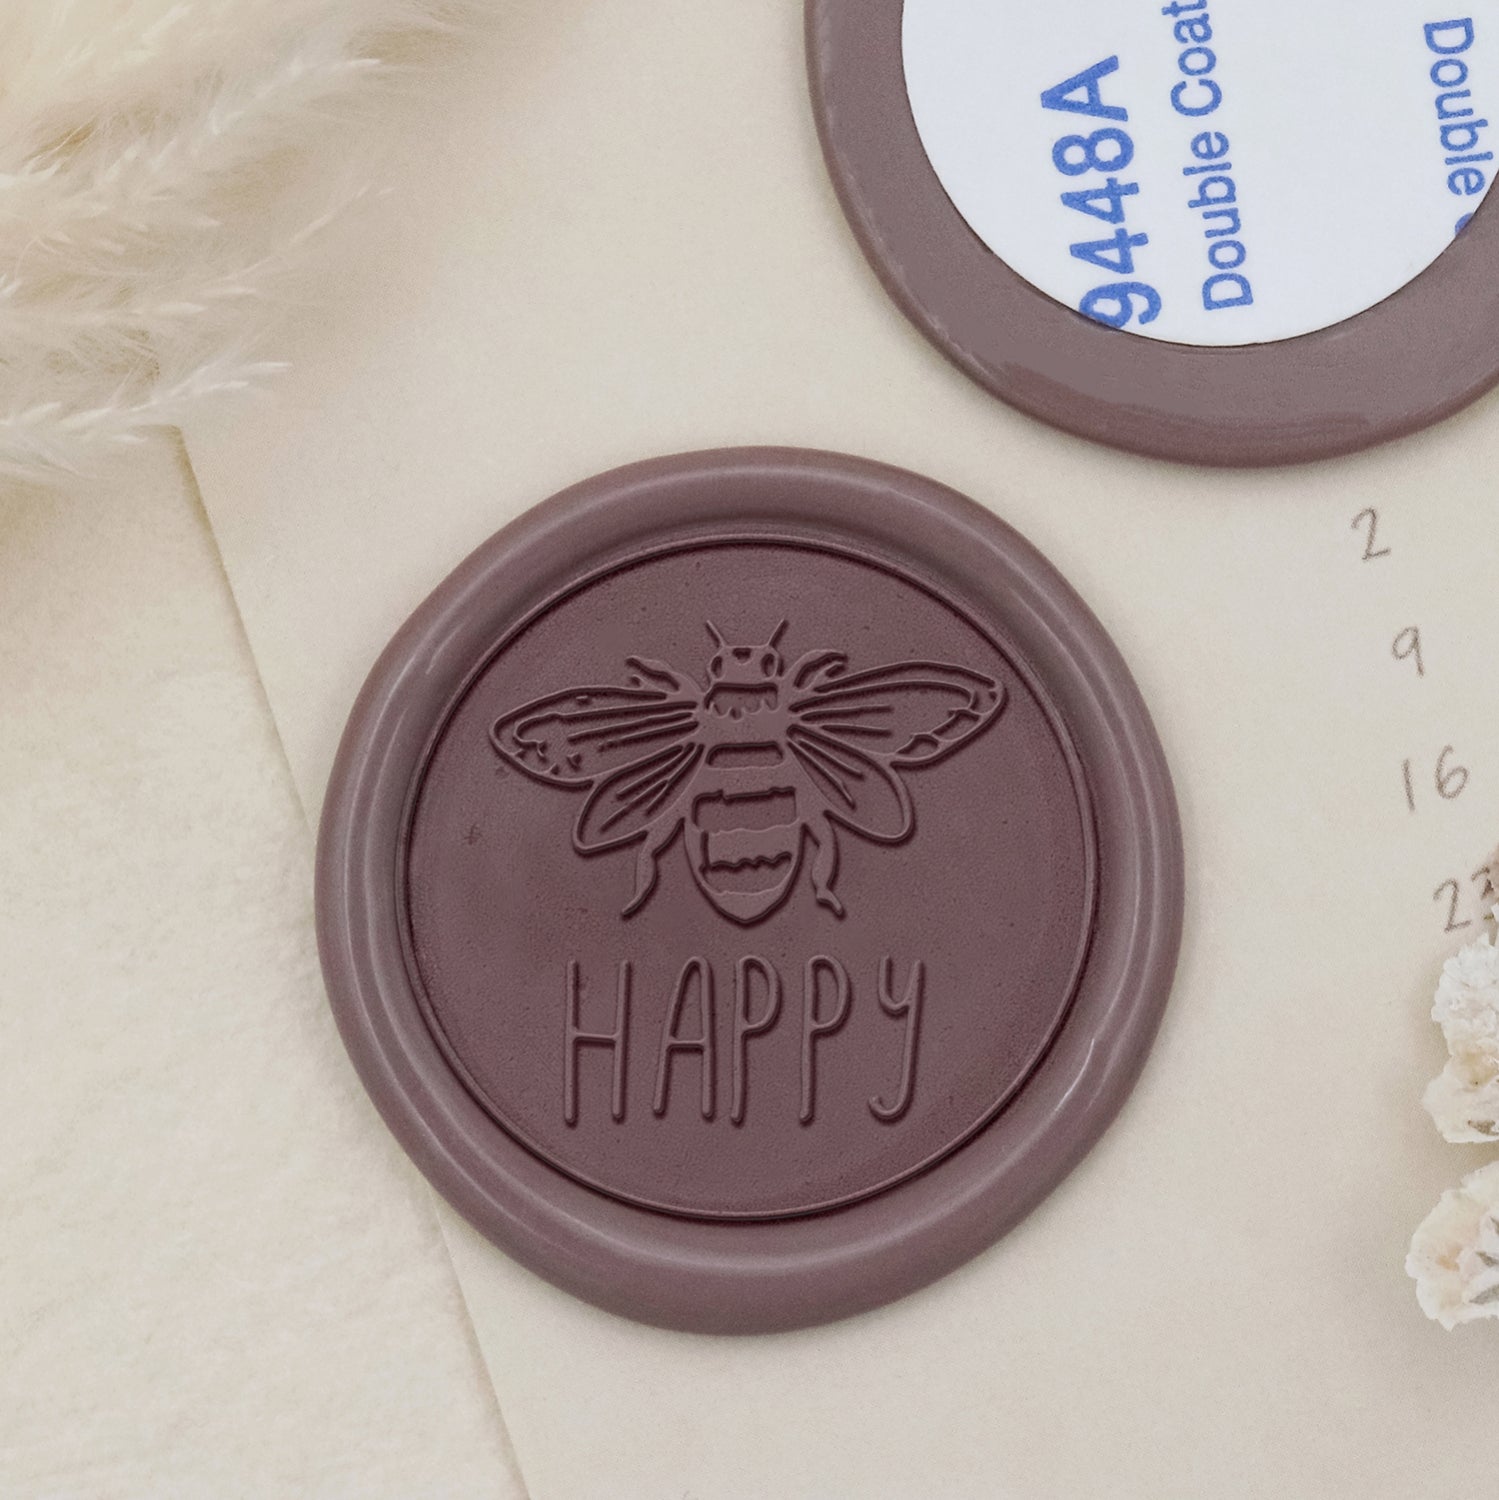 Stamprints Bee Self-adhesive Wax Seal Stickers - style 12-1